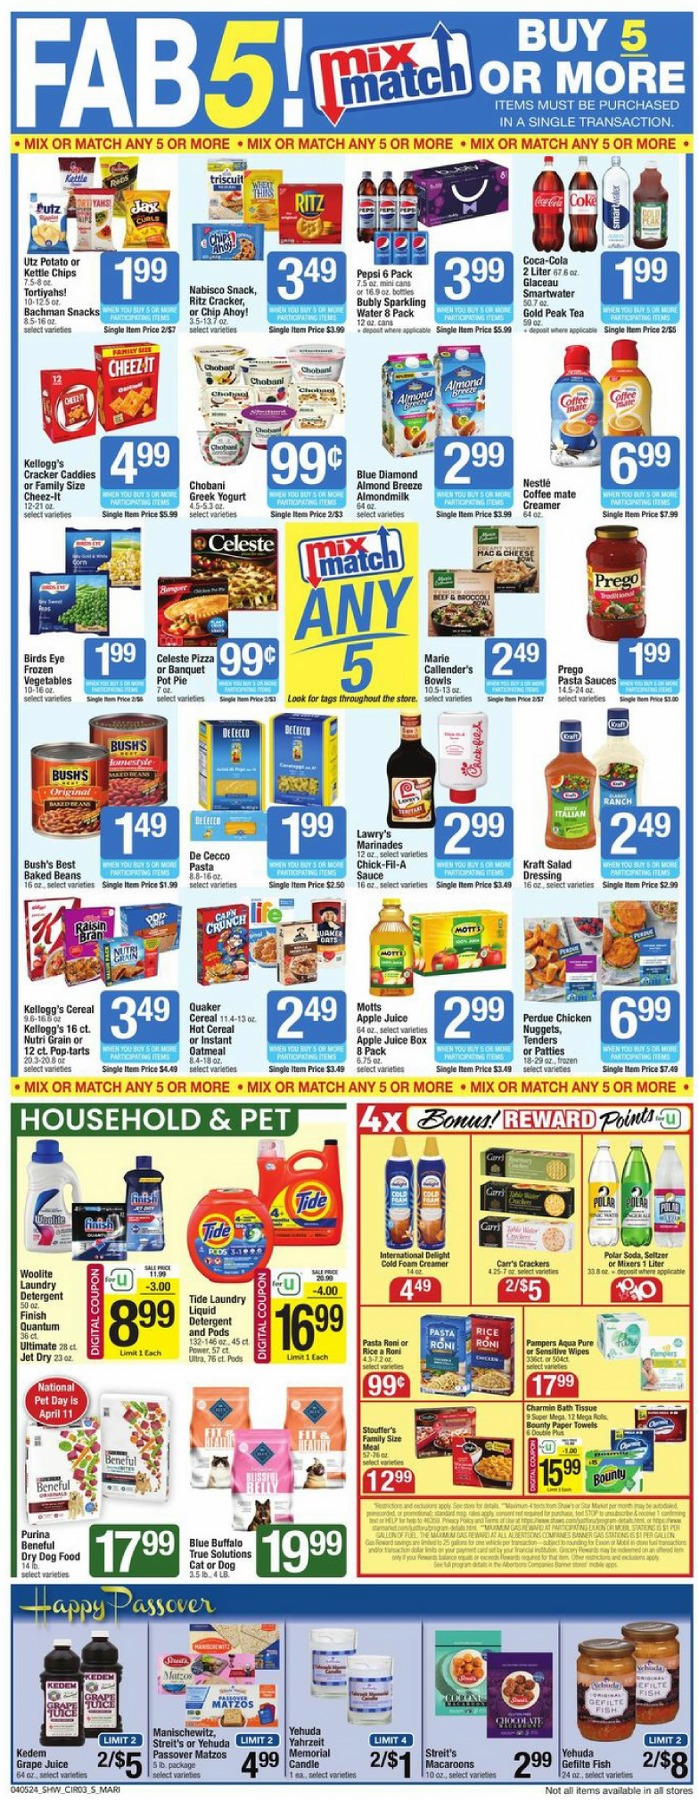 piggly wiggly muskego weekly ad